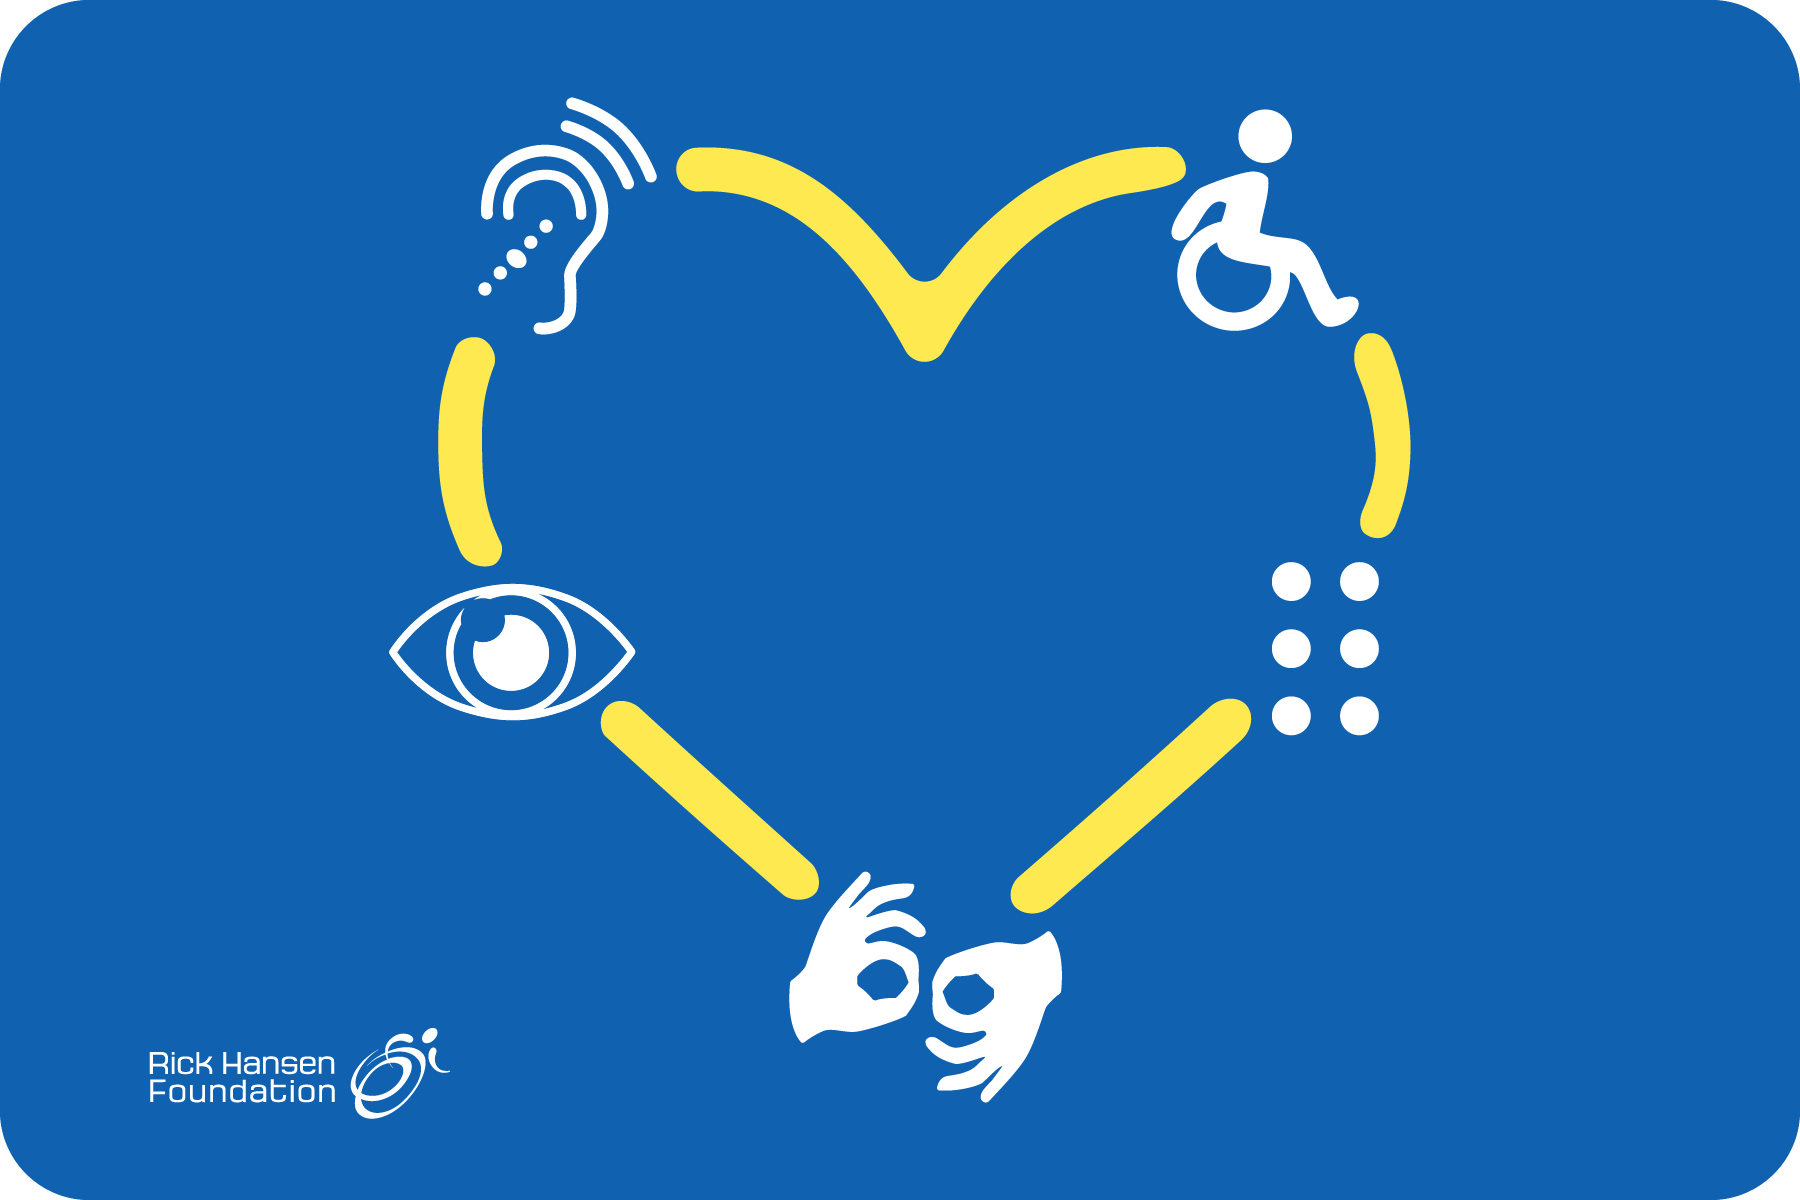 Blue background with a yellow heart that is connected by white graphics that represent braille, sign language, blindness, deaf/hard of hearing, and wheelchair use. The Rick Hansen Foundation logo is in the bottom left corner.